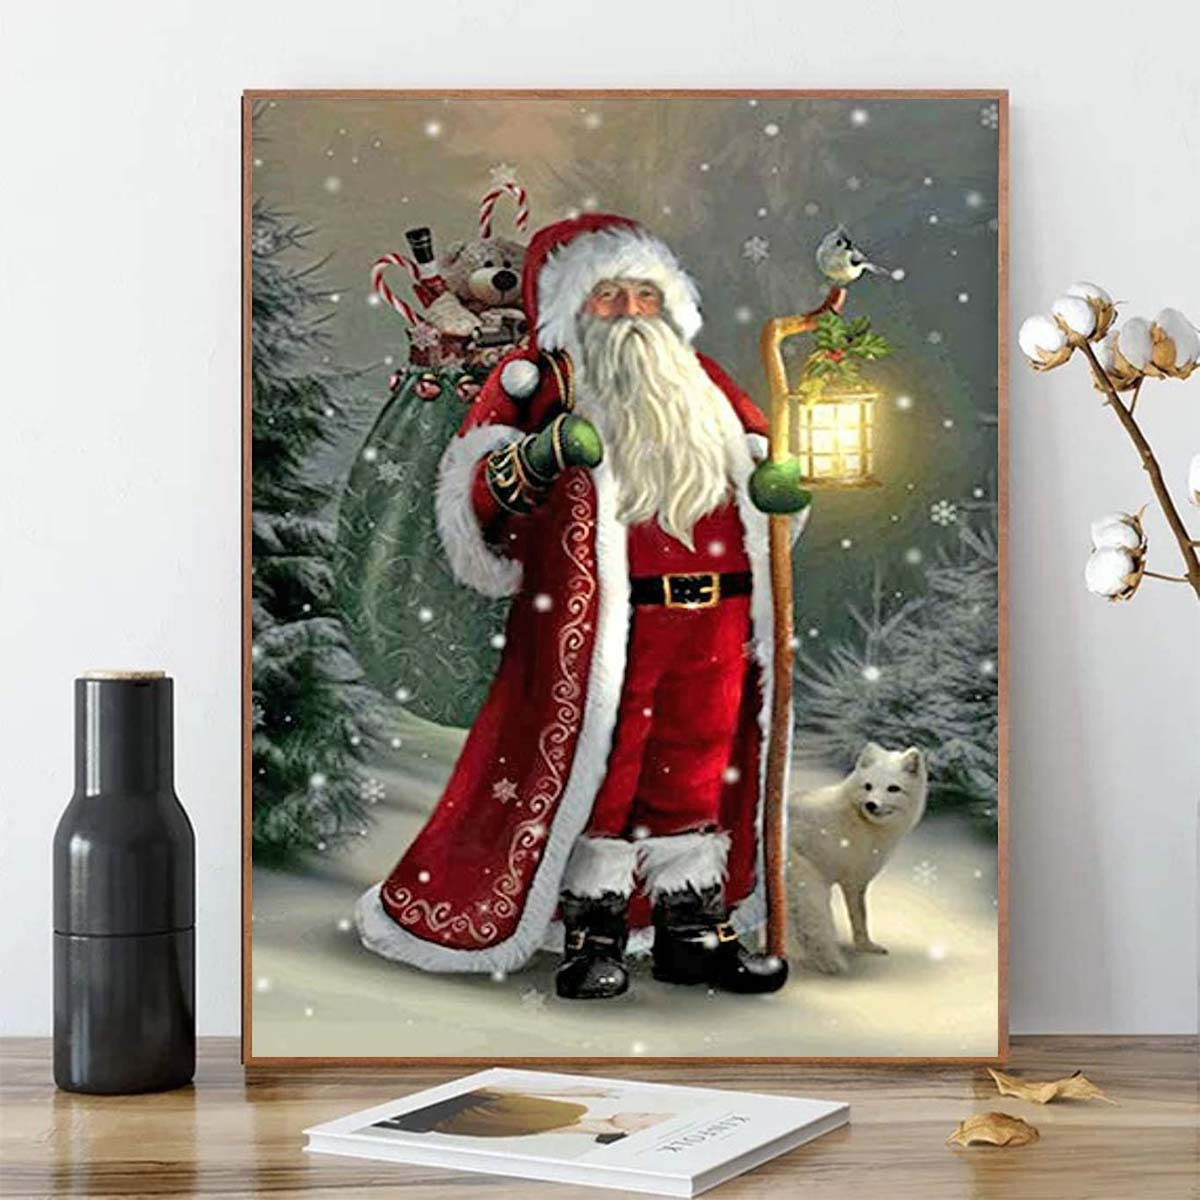 

1pc Christmas Diamond Painting Kit For Adults, 5d Diy Diamond Art Painting Crafts, Round Full Santa Claus Diamond Painting For Home Decor, Wall Decoration Holiday Gift, 20x30cm/7.9x11.8inch, Frameless